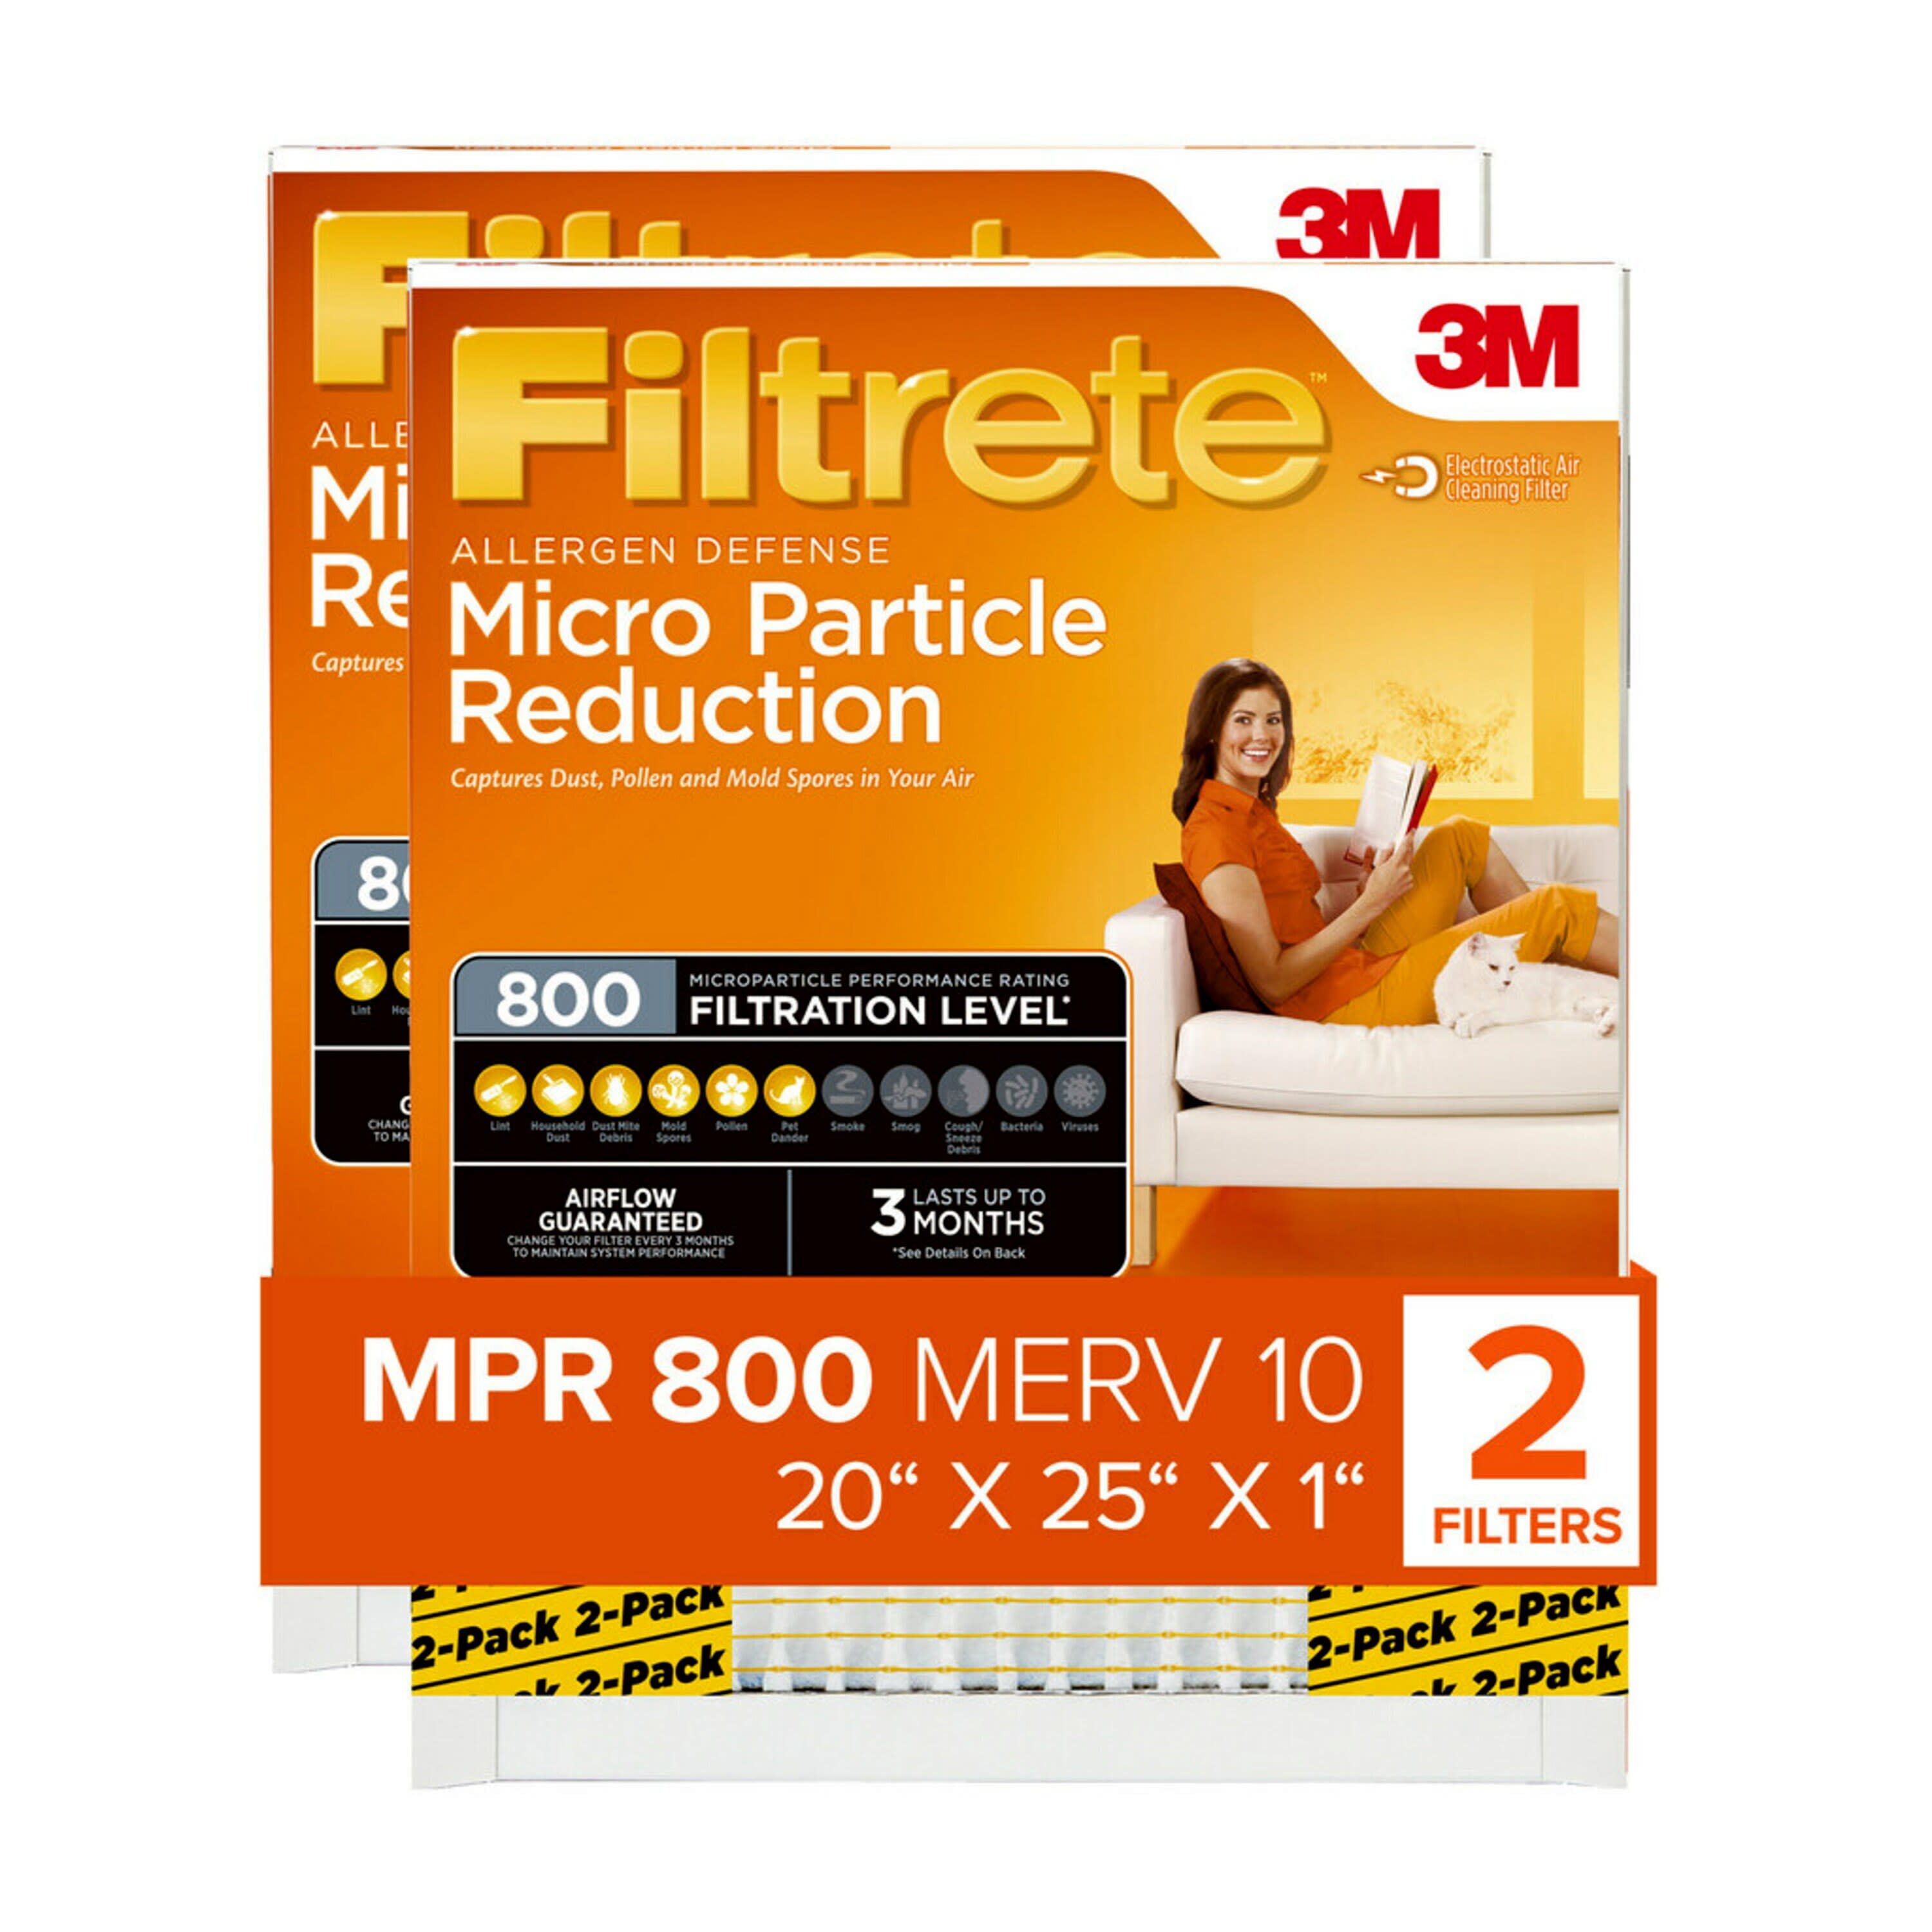 Filtrete by 3M, 20x25x1, MERV 10, Micro Particle Reduction HVAC Furnace Air Filter, Captures Pet Dander and Pollen, 800 MPR, 2 Filters